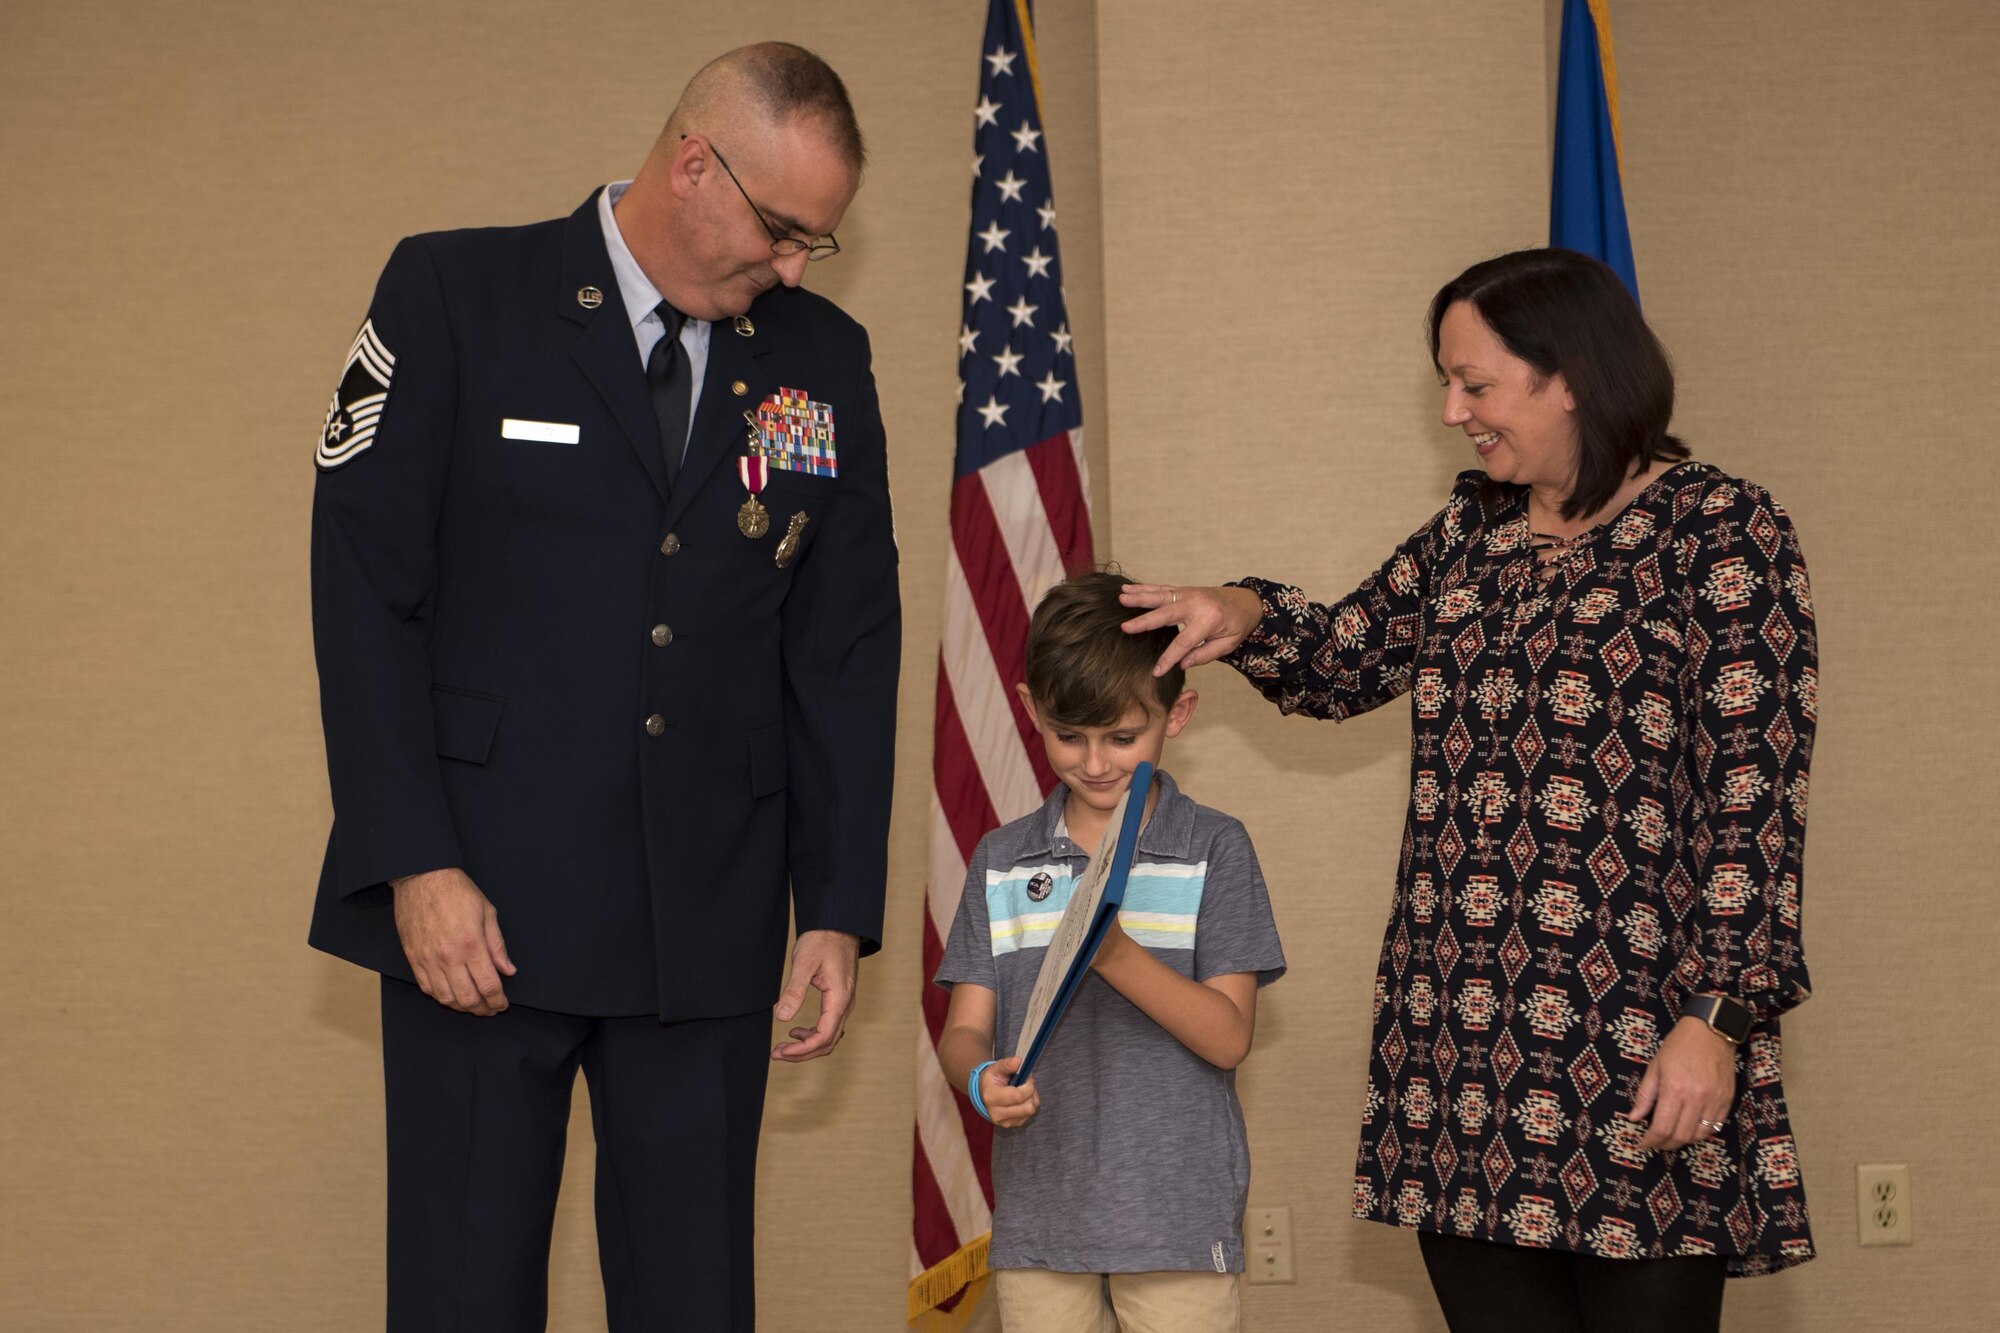 Chief Master Sgt. David Houtz, 823d Base Defense Squadron chief enlisted manager, and his wife, Beth, present their son, Logan, with an appreciation award, during Houtz’s retirement ceremony, Dec. 1, 2017, at Moody Air Force Base, Ga. Houtz enlisted in the Air Force on Oct. 6, 1991. During his 27-year career, he has held numerous leadership roles while supporting Operations Provide Promise, Southern Watch, Enduring Freedom, Iraqi Freedom and Inherent Resolve. (U.S. Air Force photo by Senior Airman Daniel Snider)